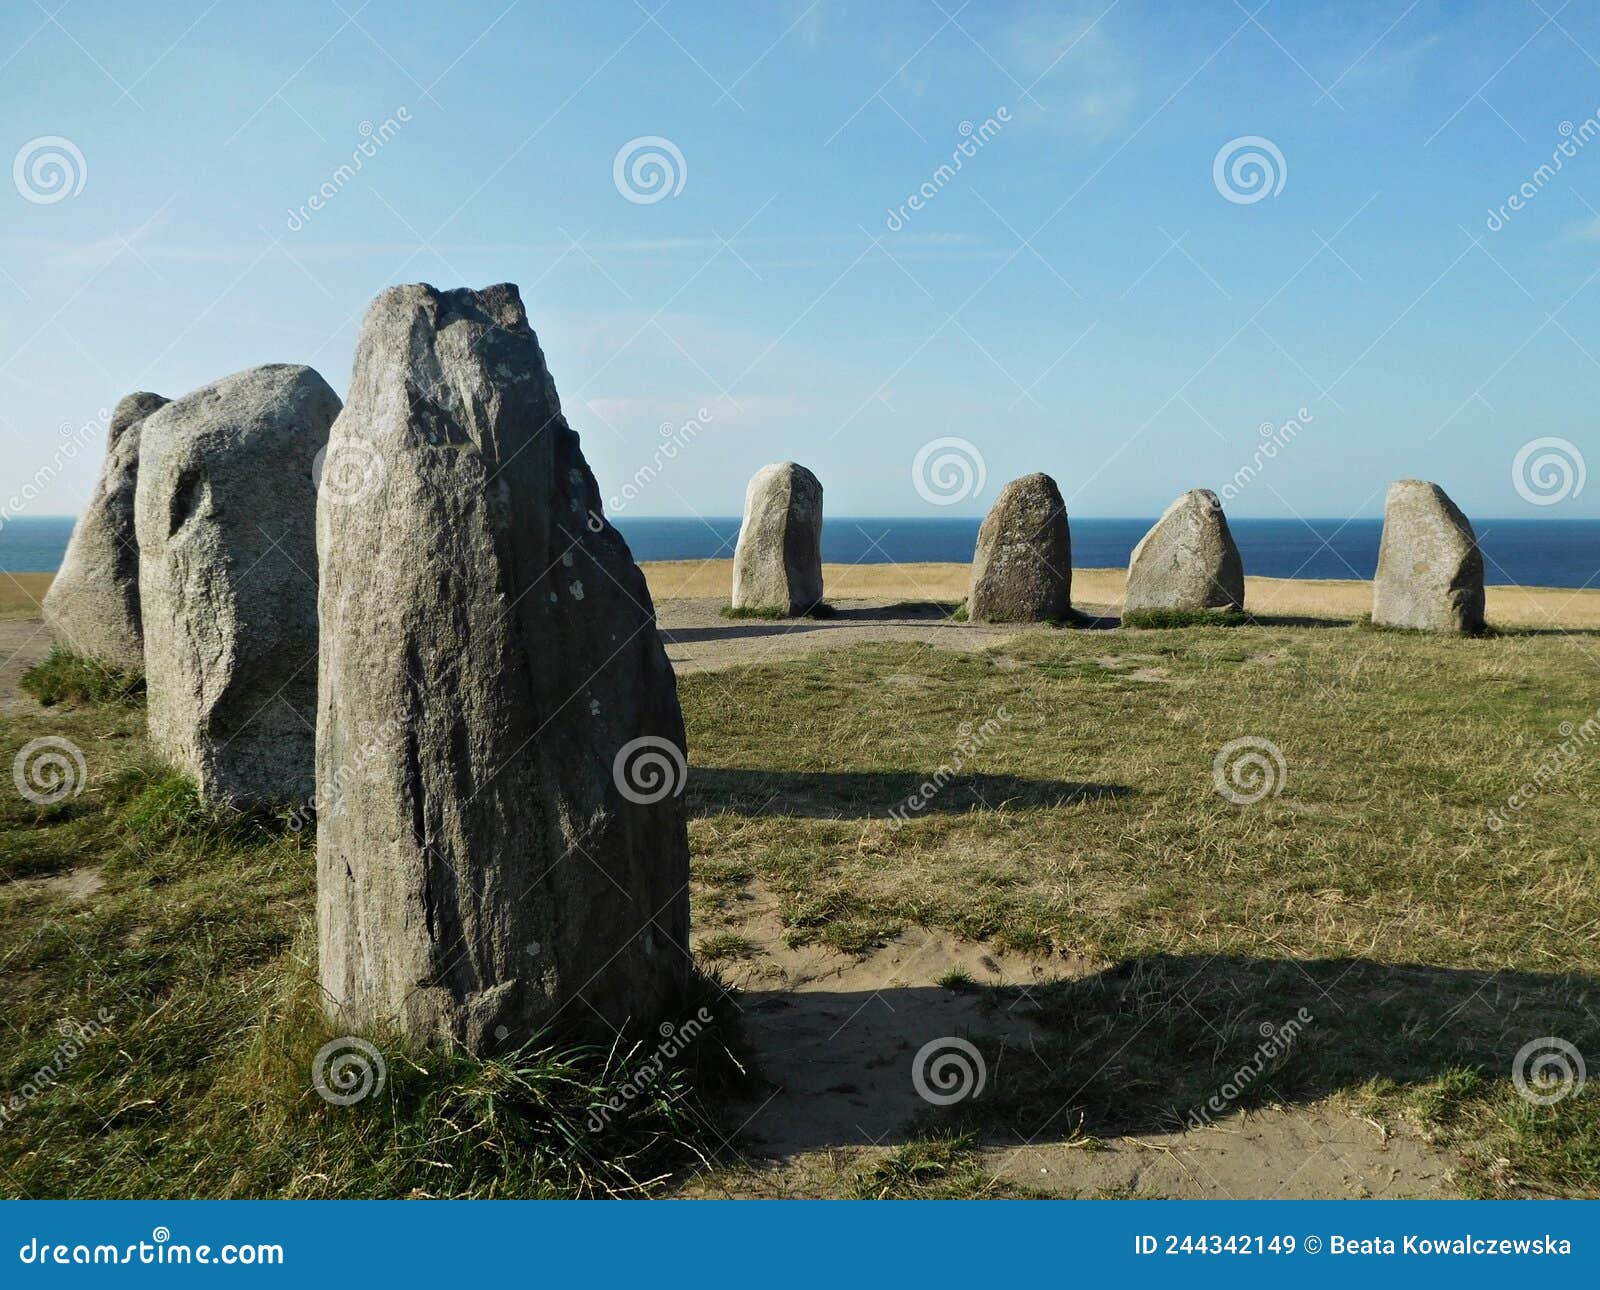 ales stenar - the mythical stone circle in sweden.